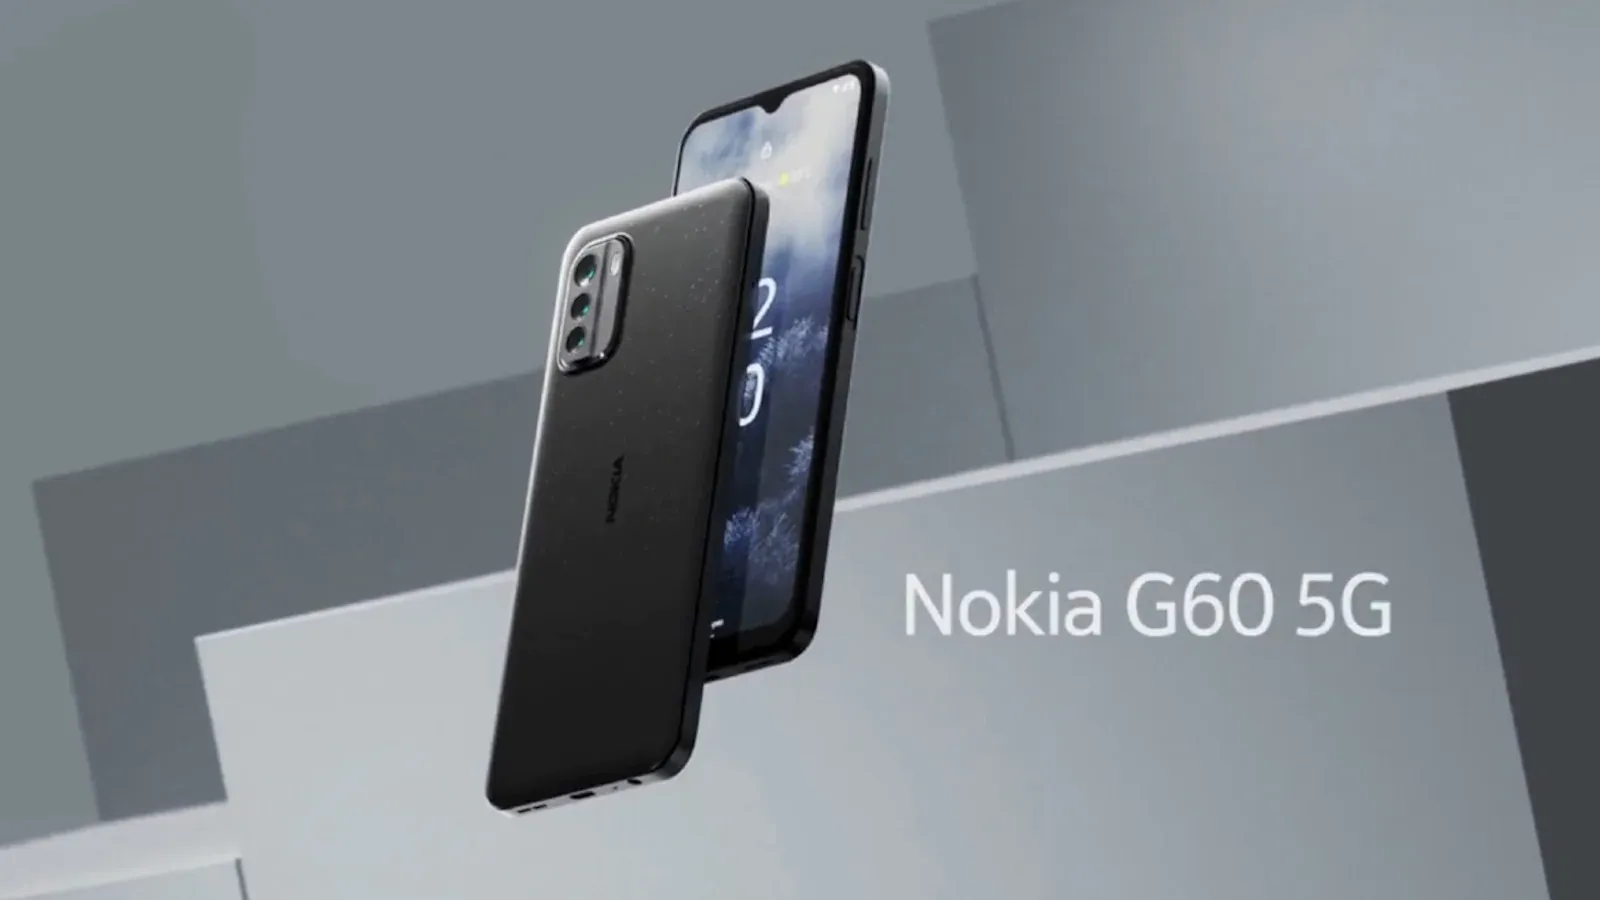 Nokia G60 sales in India start today.